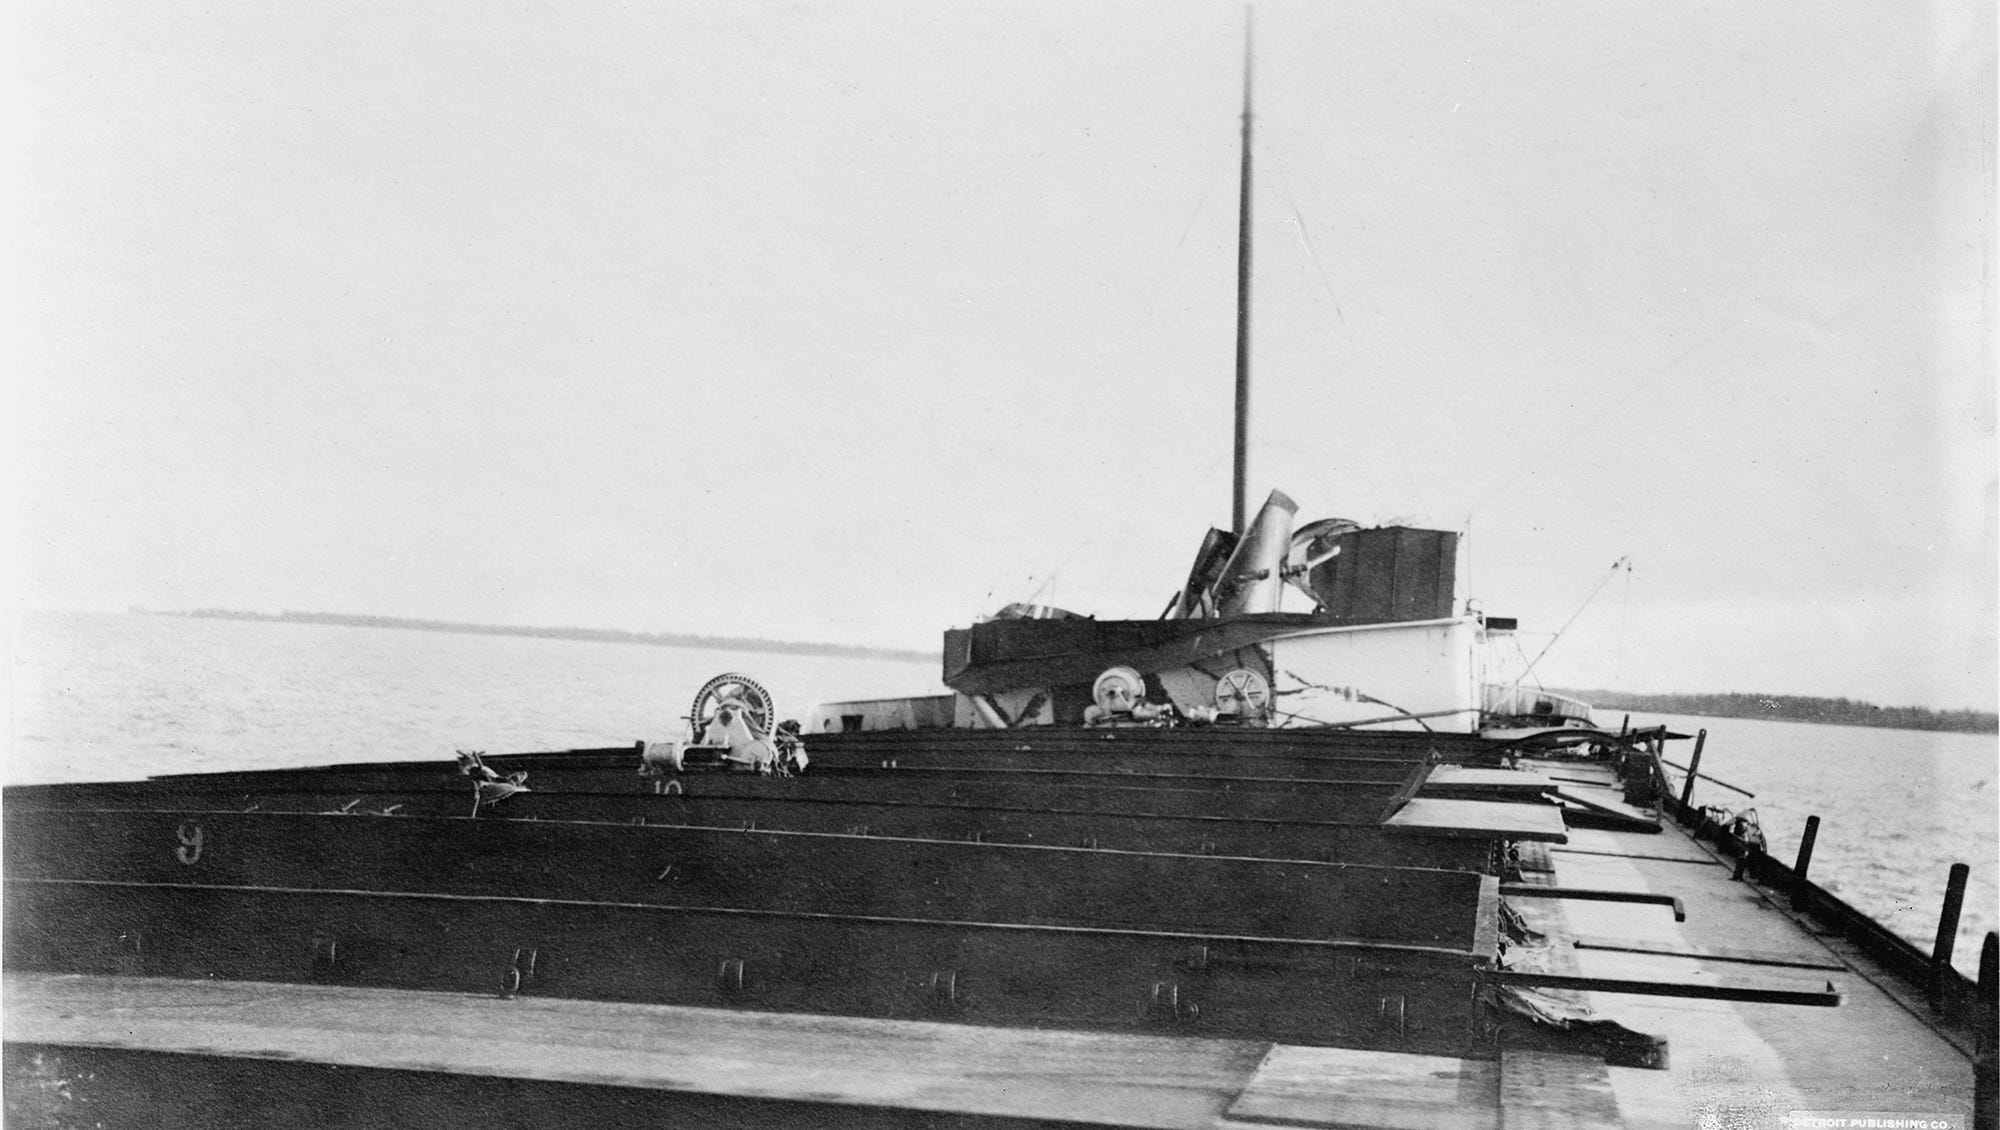 The Howard M. Hannah Jr., a 500-foot freighter, was carrying a load of coal when it passed Port Huron and entered Lake Huron.  The storm smashed its windows, cracked the hull, toppled its smokestack and drove it onto on the rocks near Port Austin.  All 25 crew members survived.  Above, the ship's rear cabin and smashed smokestack are seen after the storm.